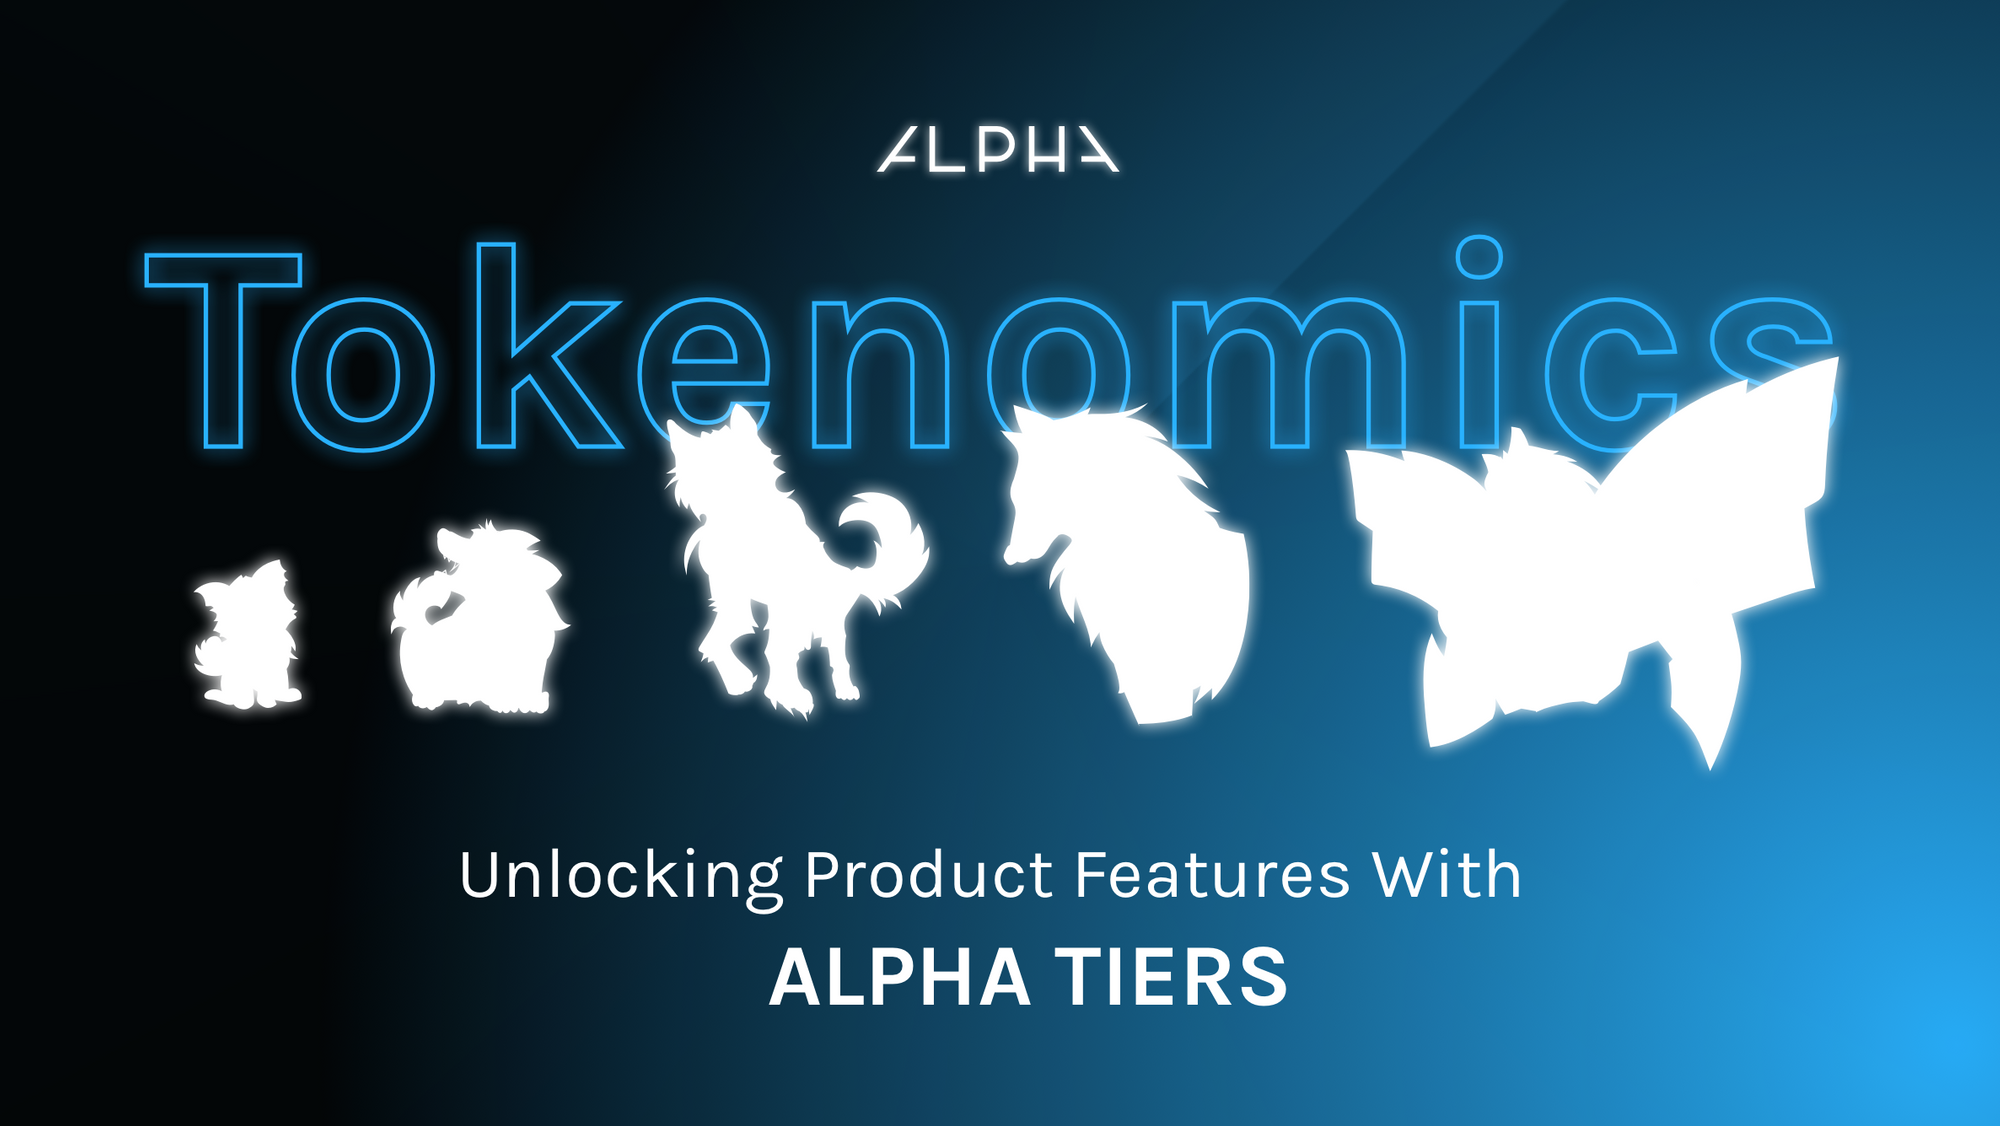 ALPHA Tokenomics: Unlocking Product Features With Alpha Tiers